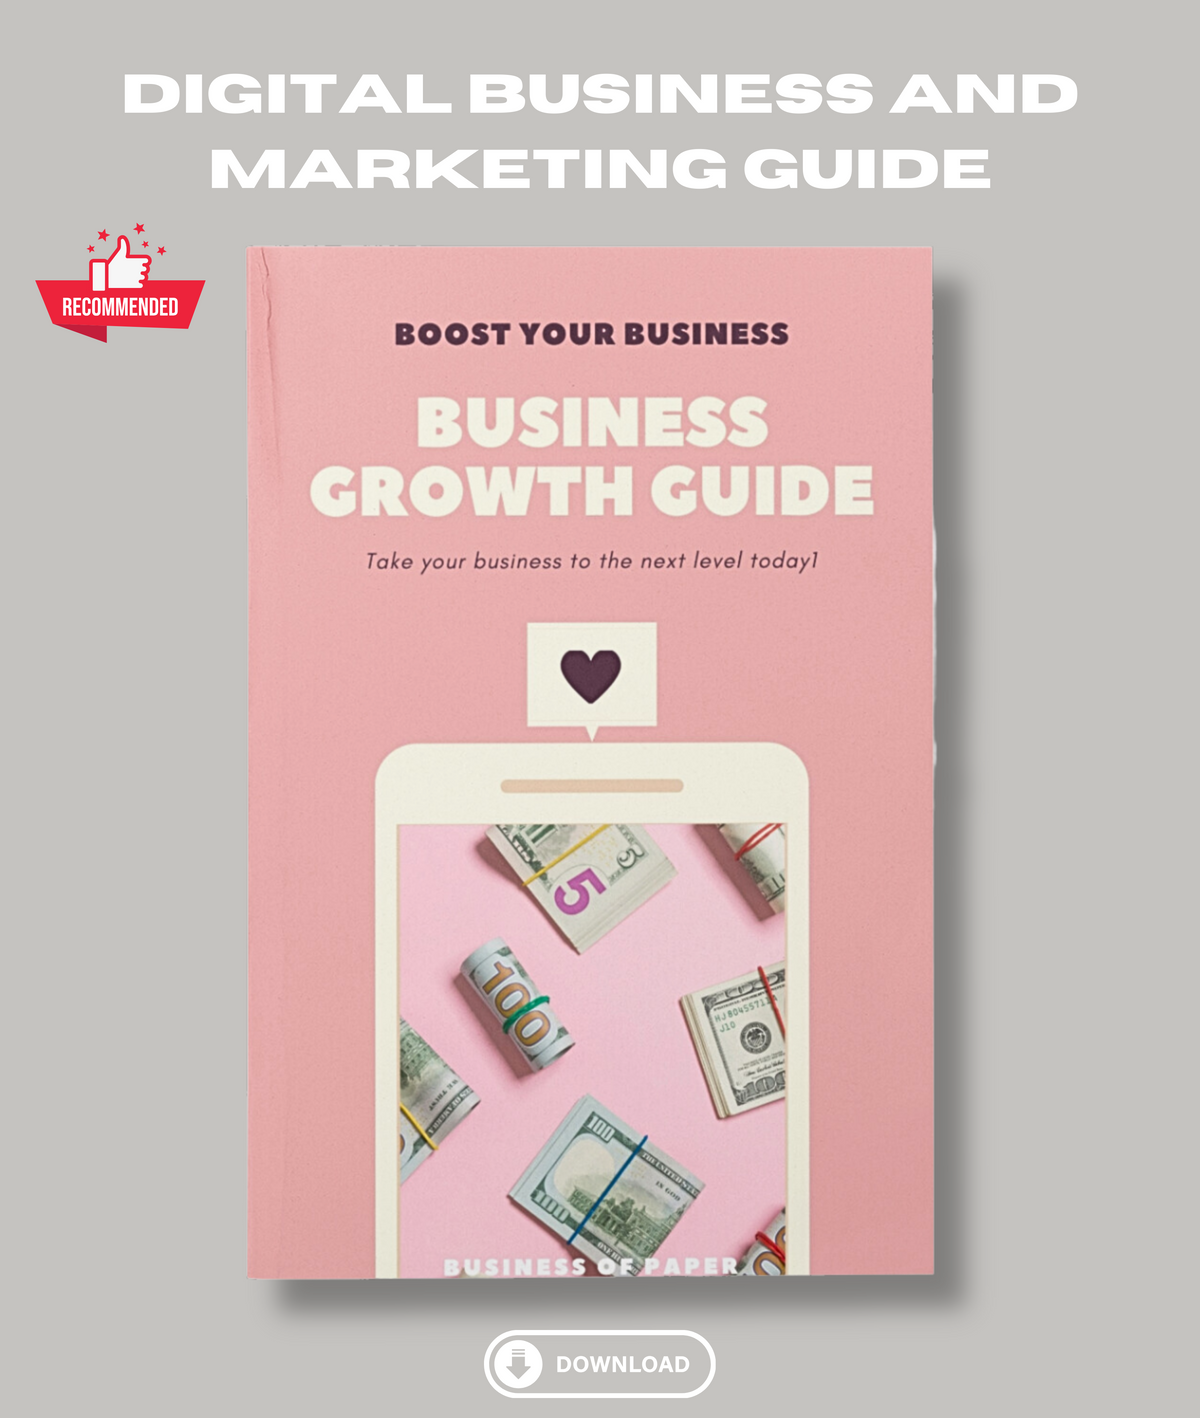 Business Growth: A Guide to Market and Build Your E-Commerce Business